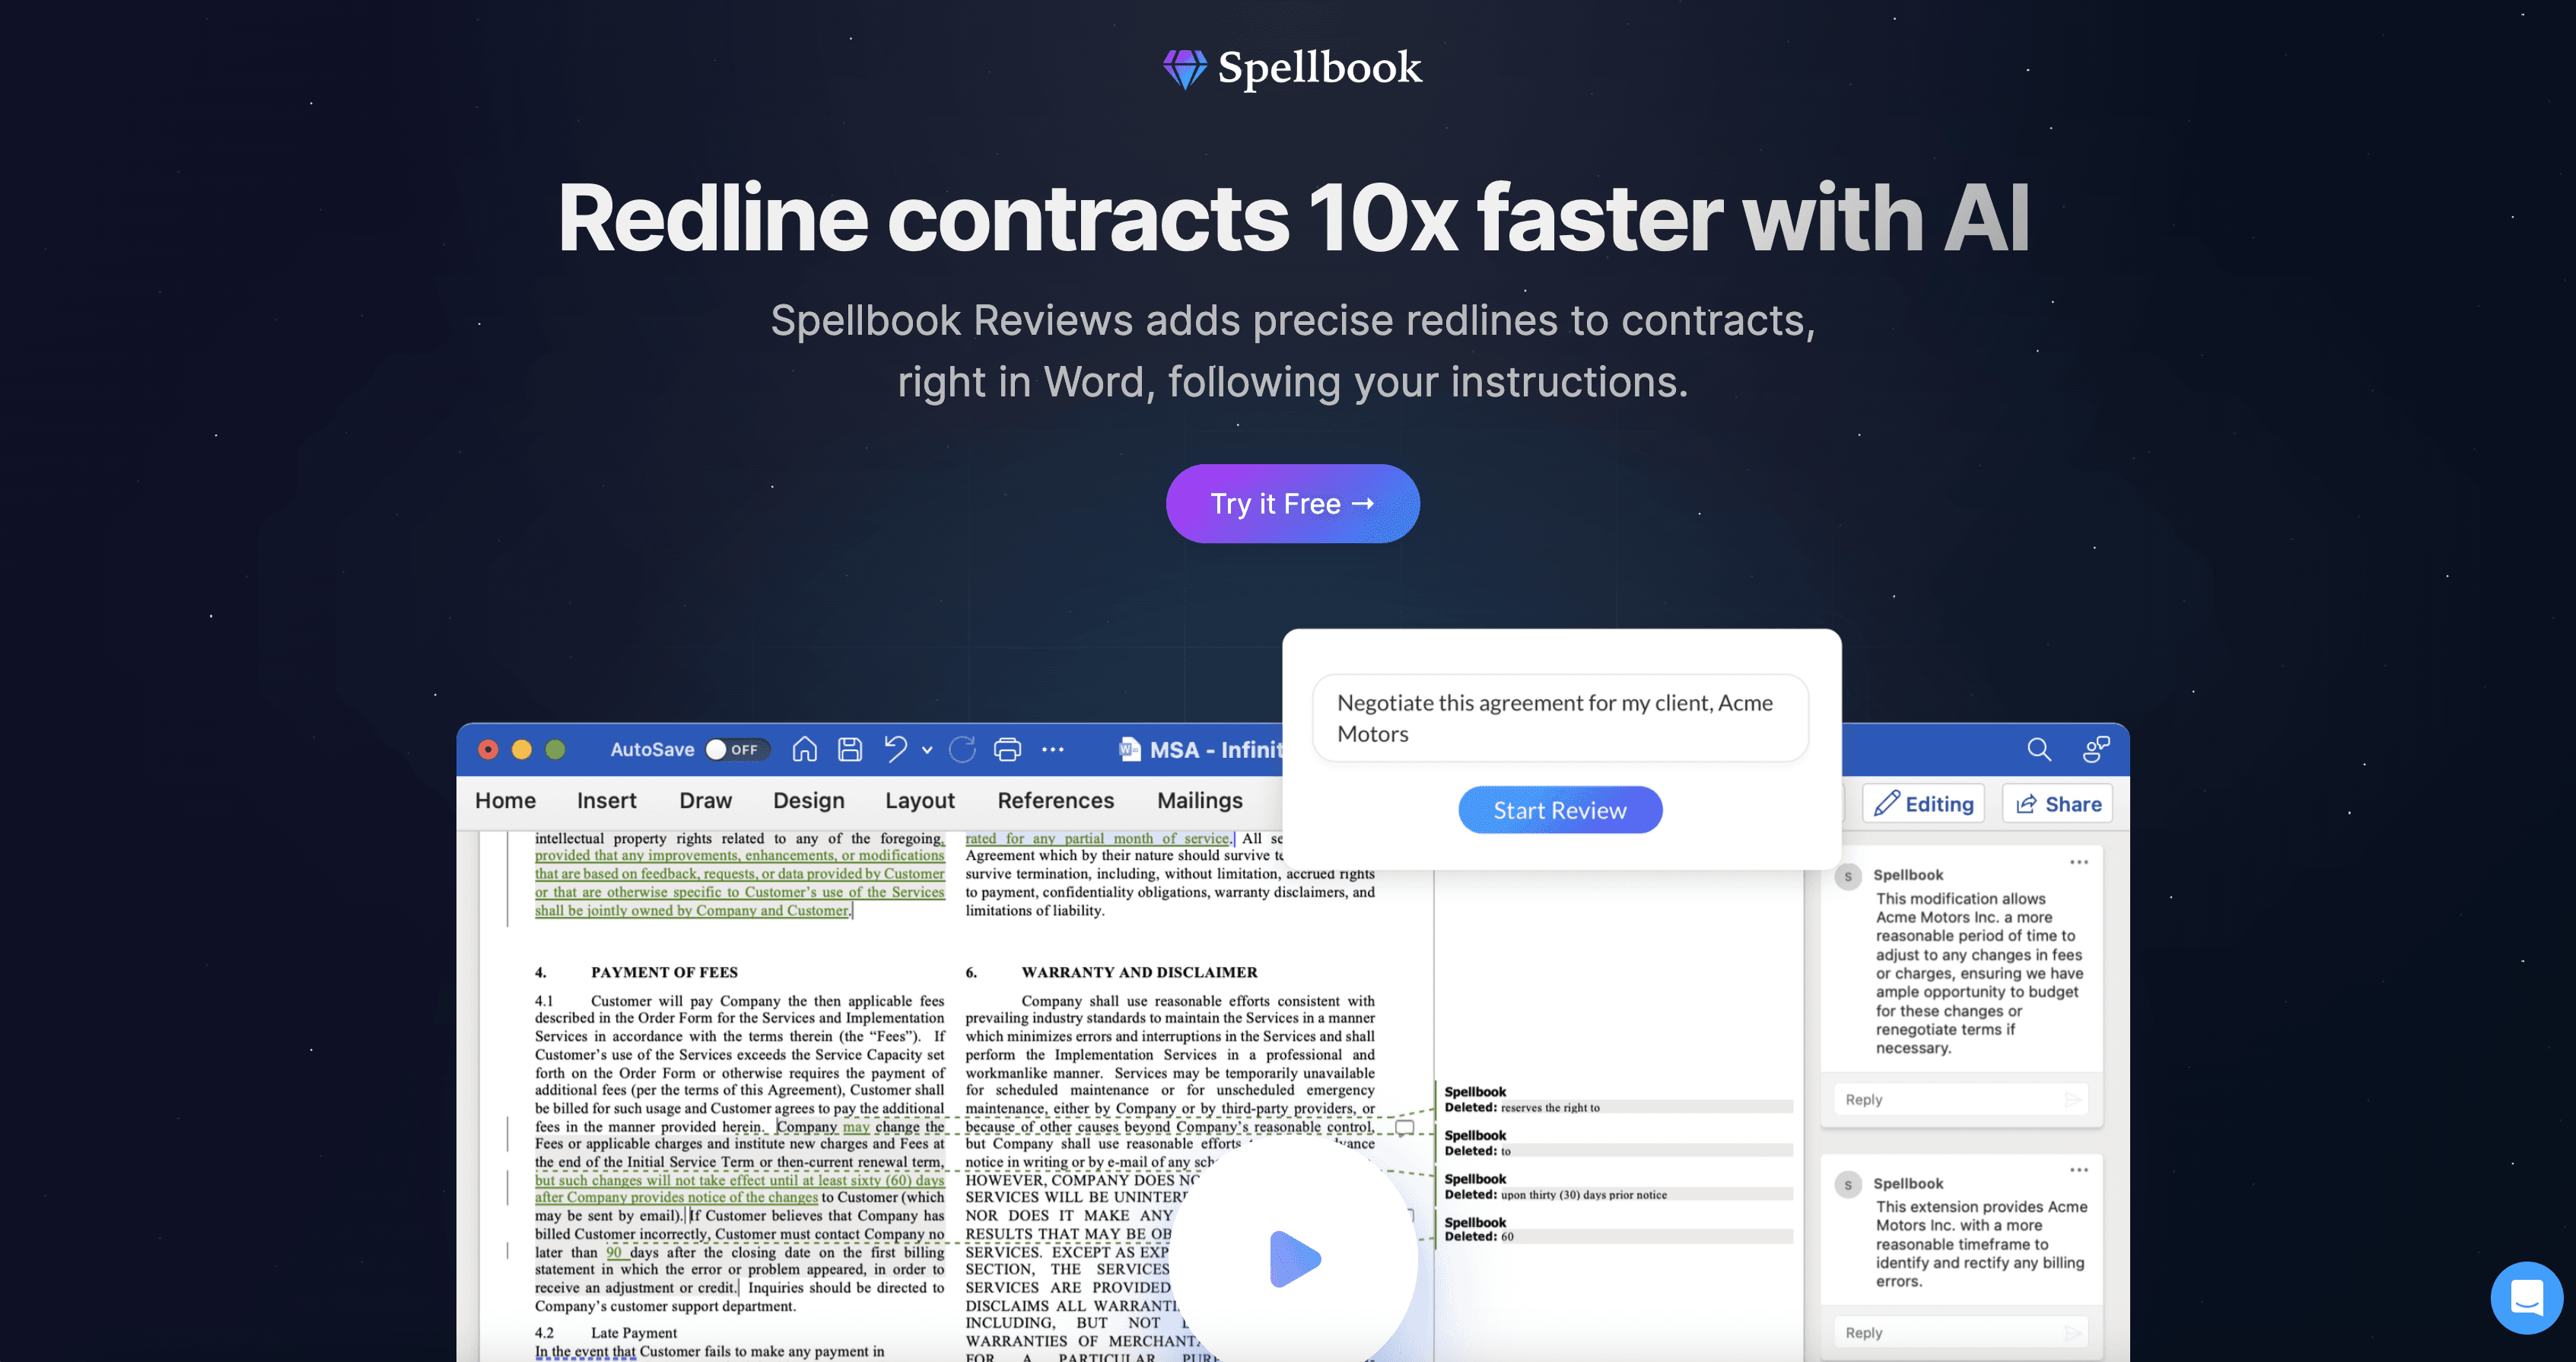 Redline contracts 10x faster with AI